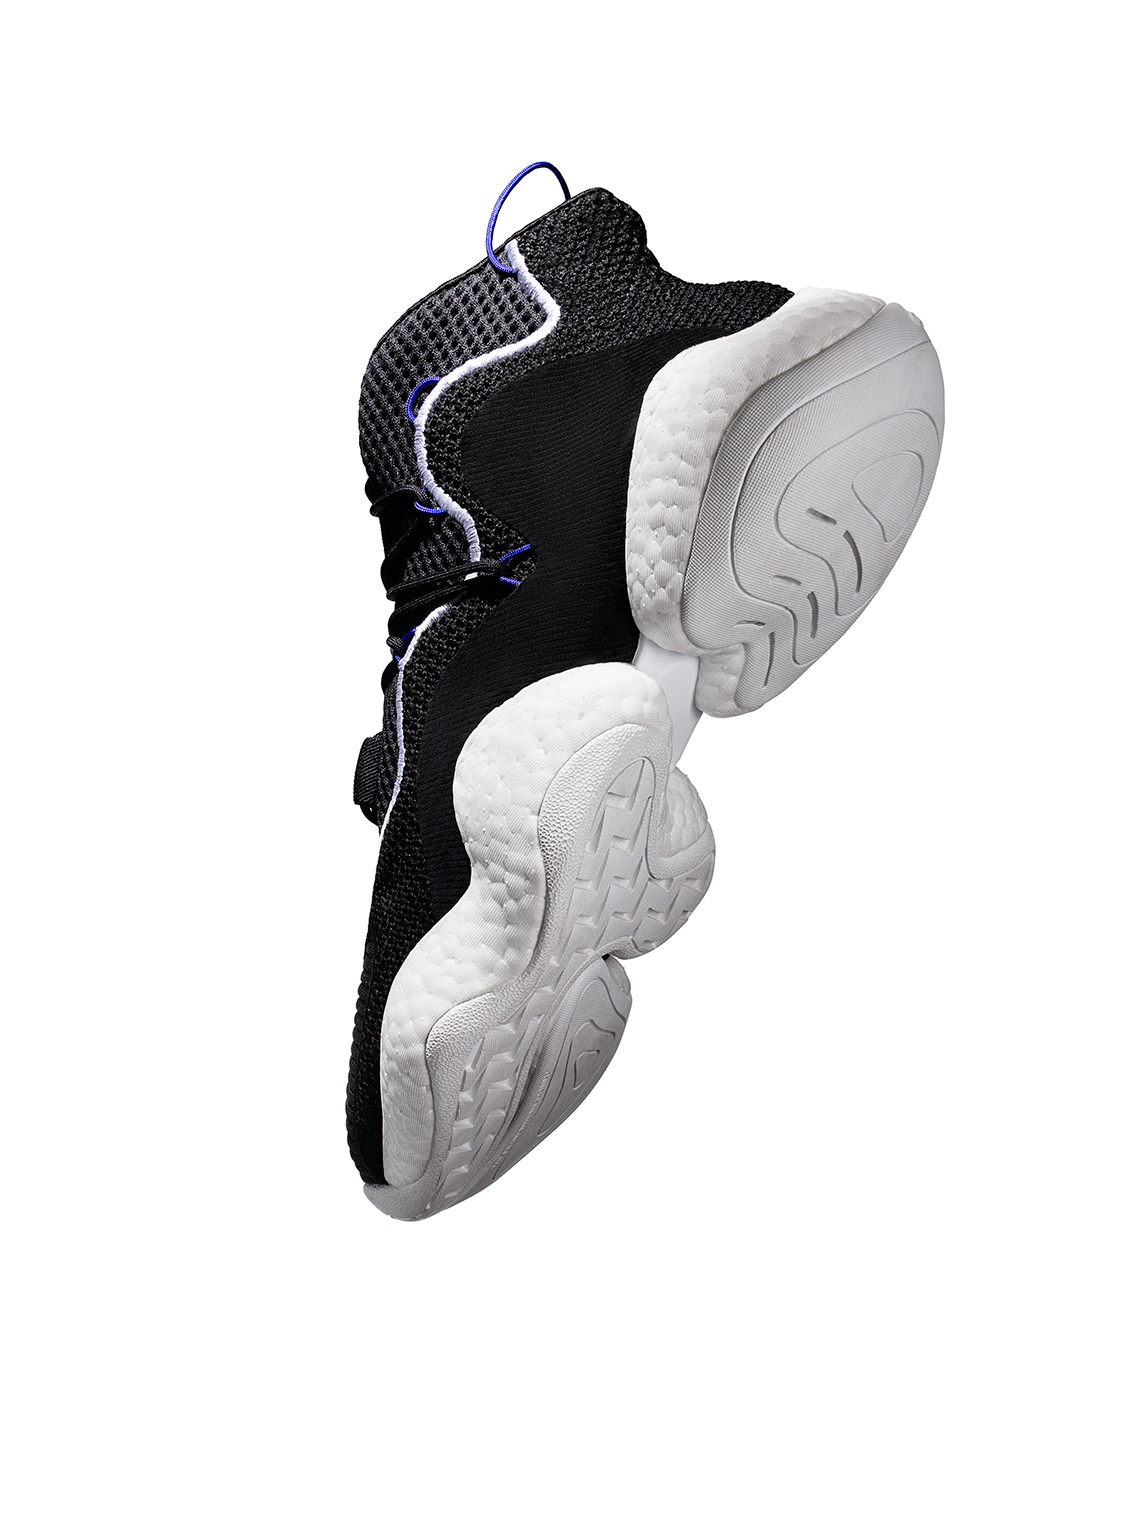 Adidas Crazy Byw Release Info 3